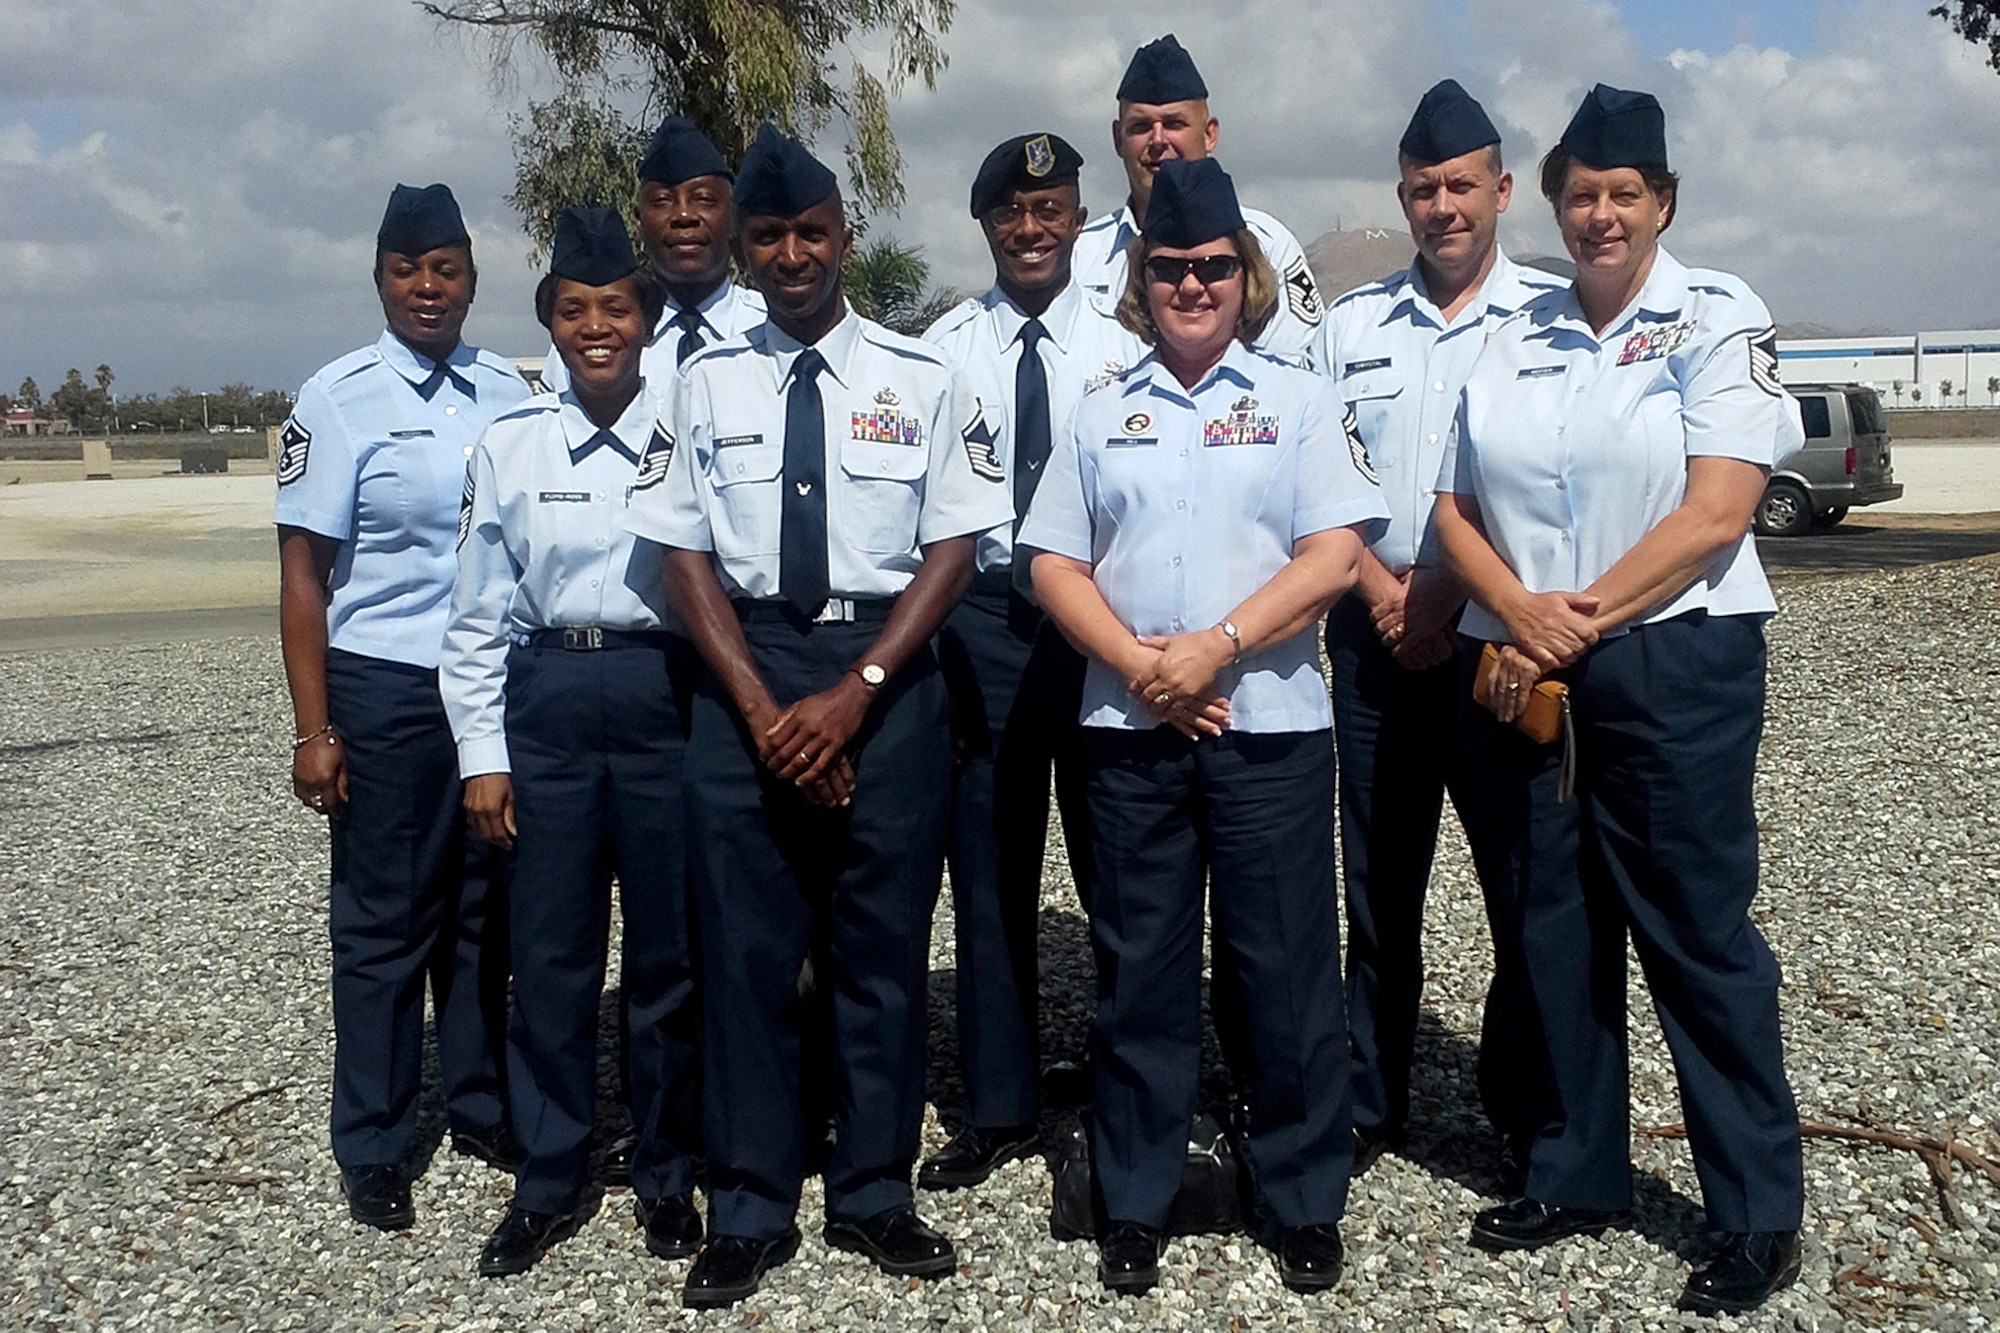 U.S. Air Force Airmen from the South Carolina Air National Guard attended a three-day workshop at March Air Force Base to receive Yellow Ribbon, deployment readiness and Four Lenses training, Sept. 2014.   Pictured from left to right, Master Sgt. Cynthia Rucker, Chief Master Sgt. Bonita Floyd-Ross, Command Chief Master Sgt. Robert Davis, Master Sgt. James Jefferson, Tech. Sgt. Michael Bryant, Senior Master Sgt. David Hutter, Senior Master Sgt. Rhonda Hill, Chief Master Sgt. Shawn Chrystal and Master Sgt. Martina Borg. (U.S. Air National Guard photo by UNKNOWN/Released)